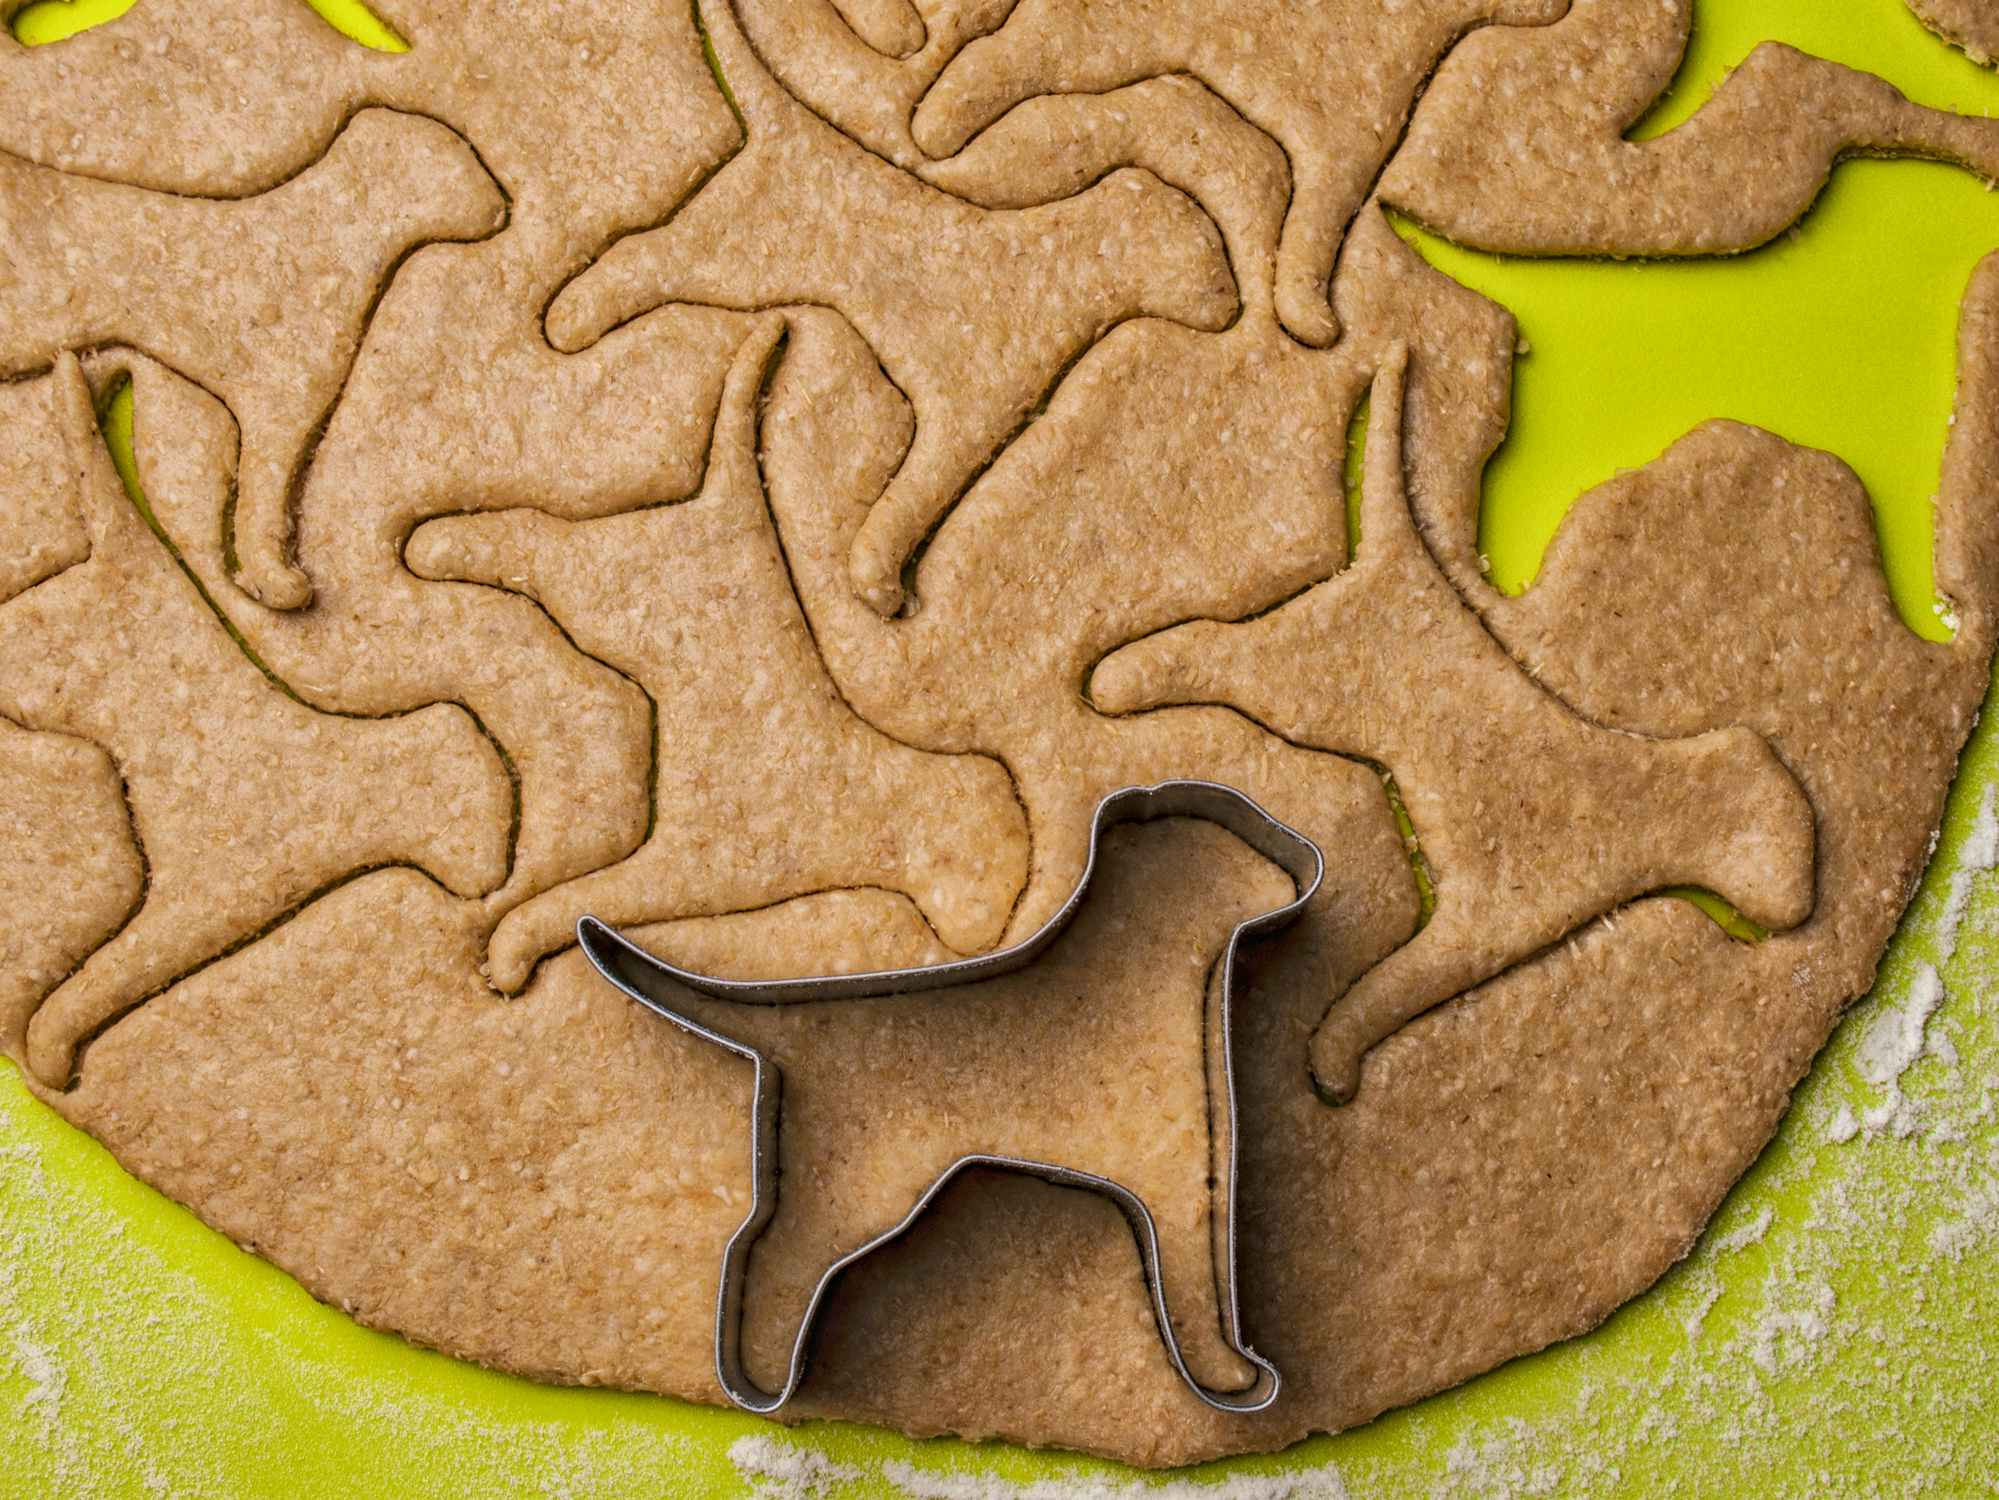 homemade dog treats and dog-shaped cookie cutter